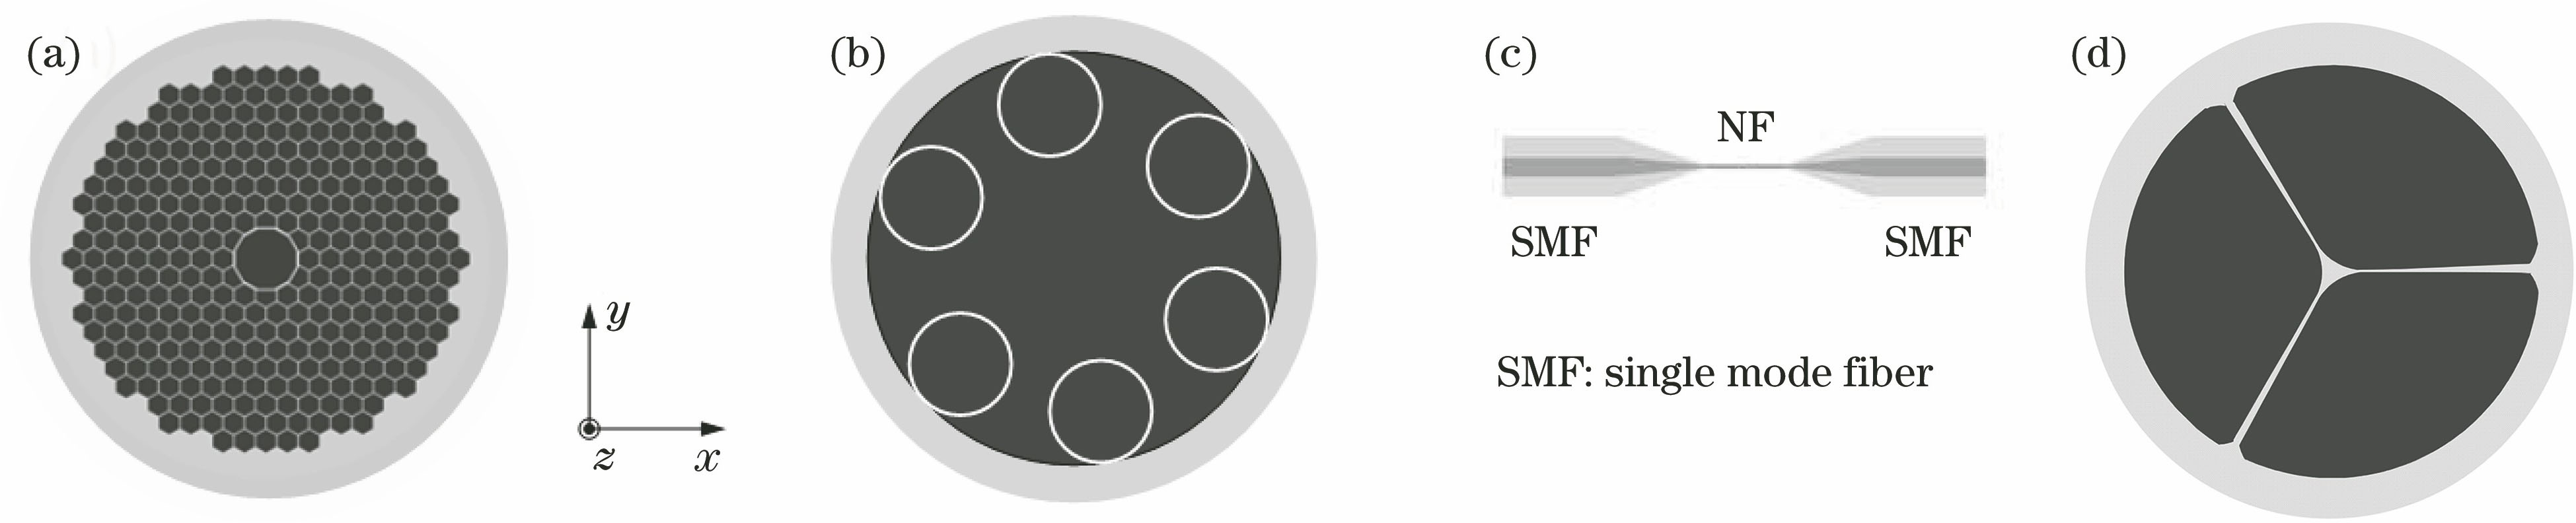 Different types of micro/nano-structured optical fibers that can be used for gas or liquid sample cells. (a) PBG-HCF; (b) AR-HCF; (c) NF; (d) SCF